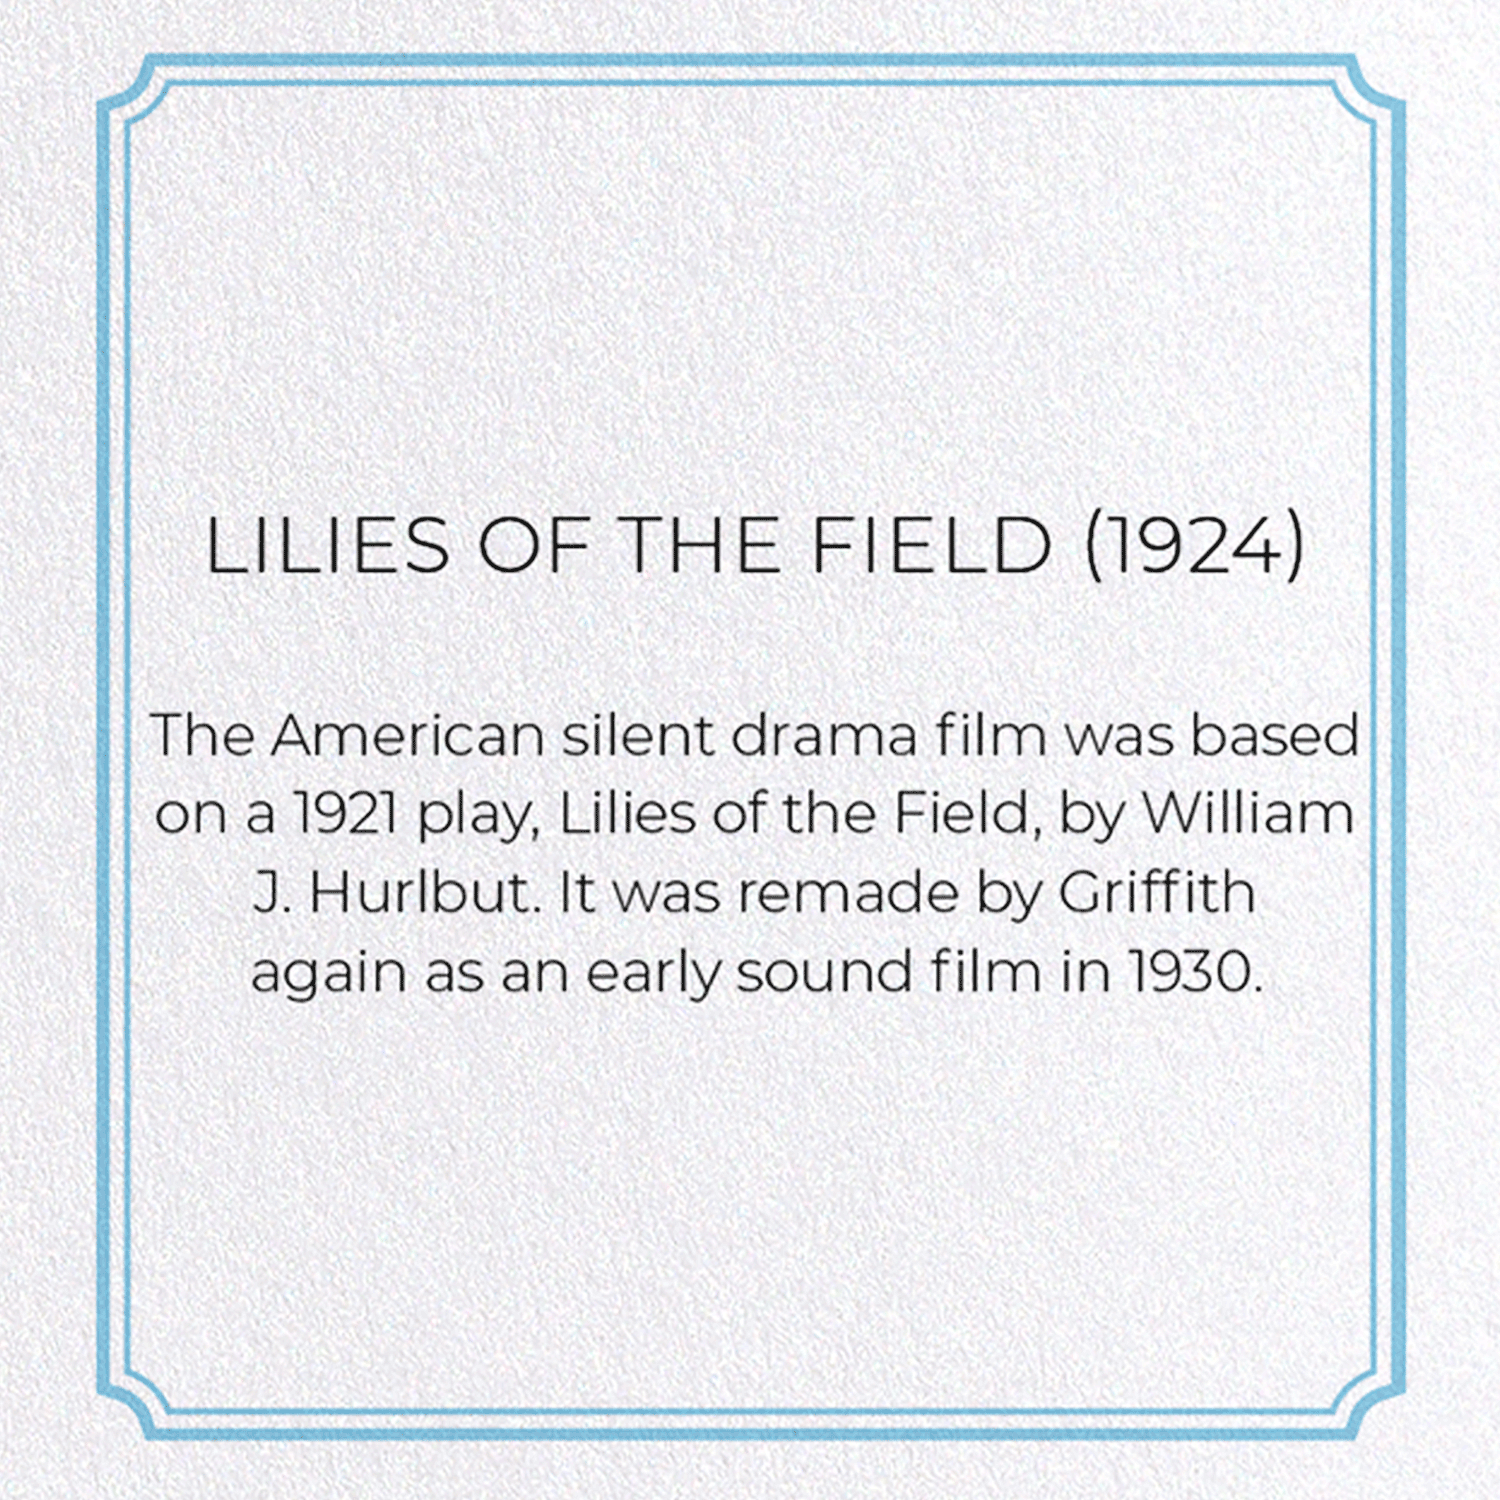 LILIES OF THE FIELD (1924)